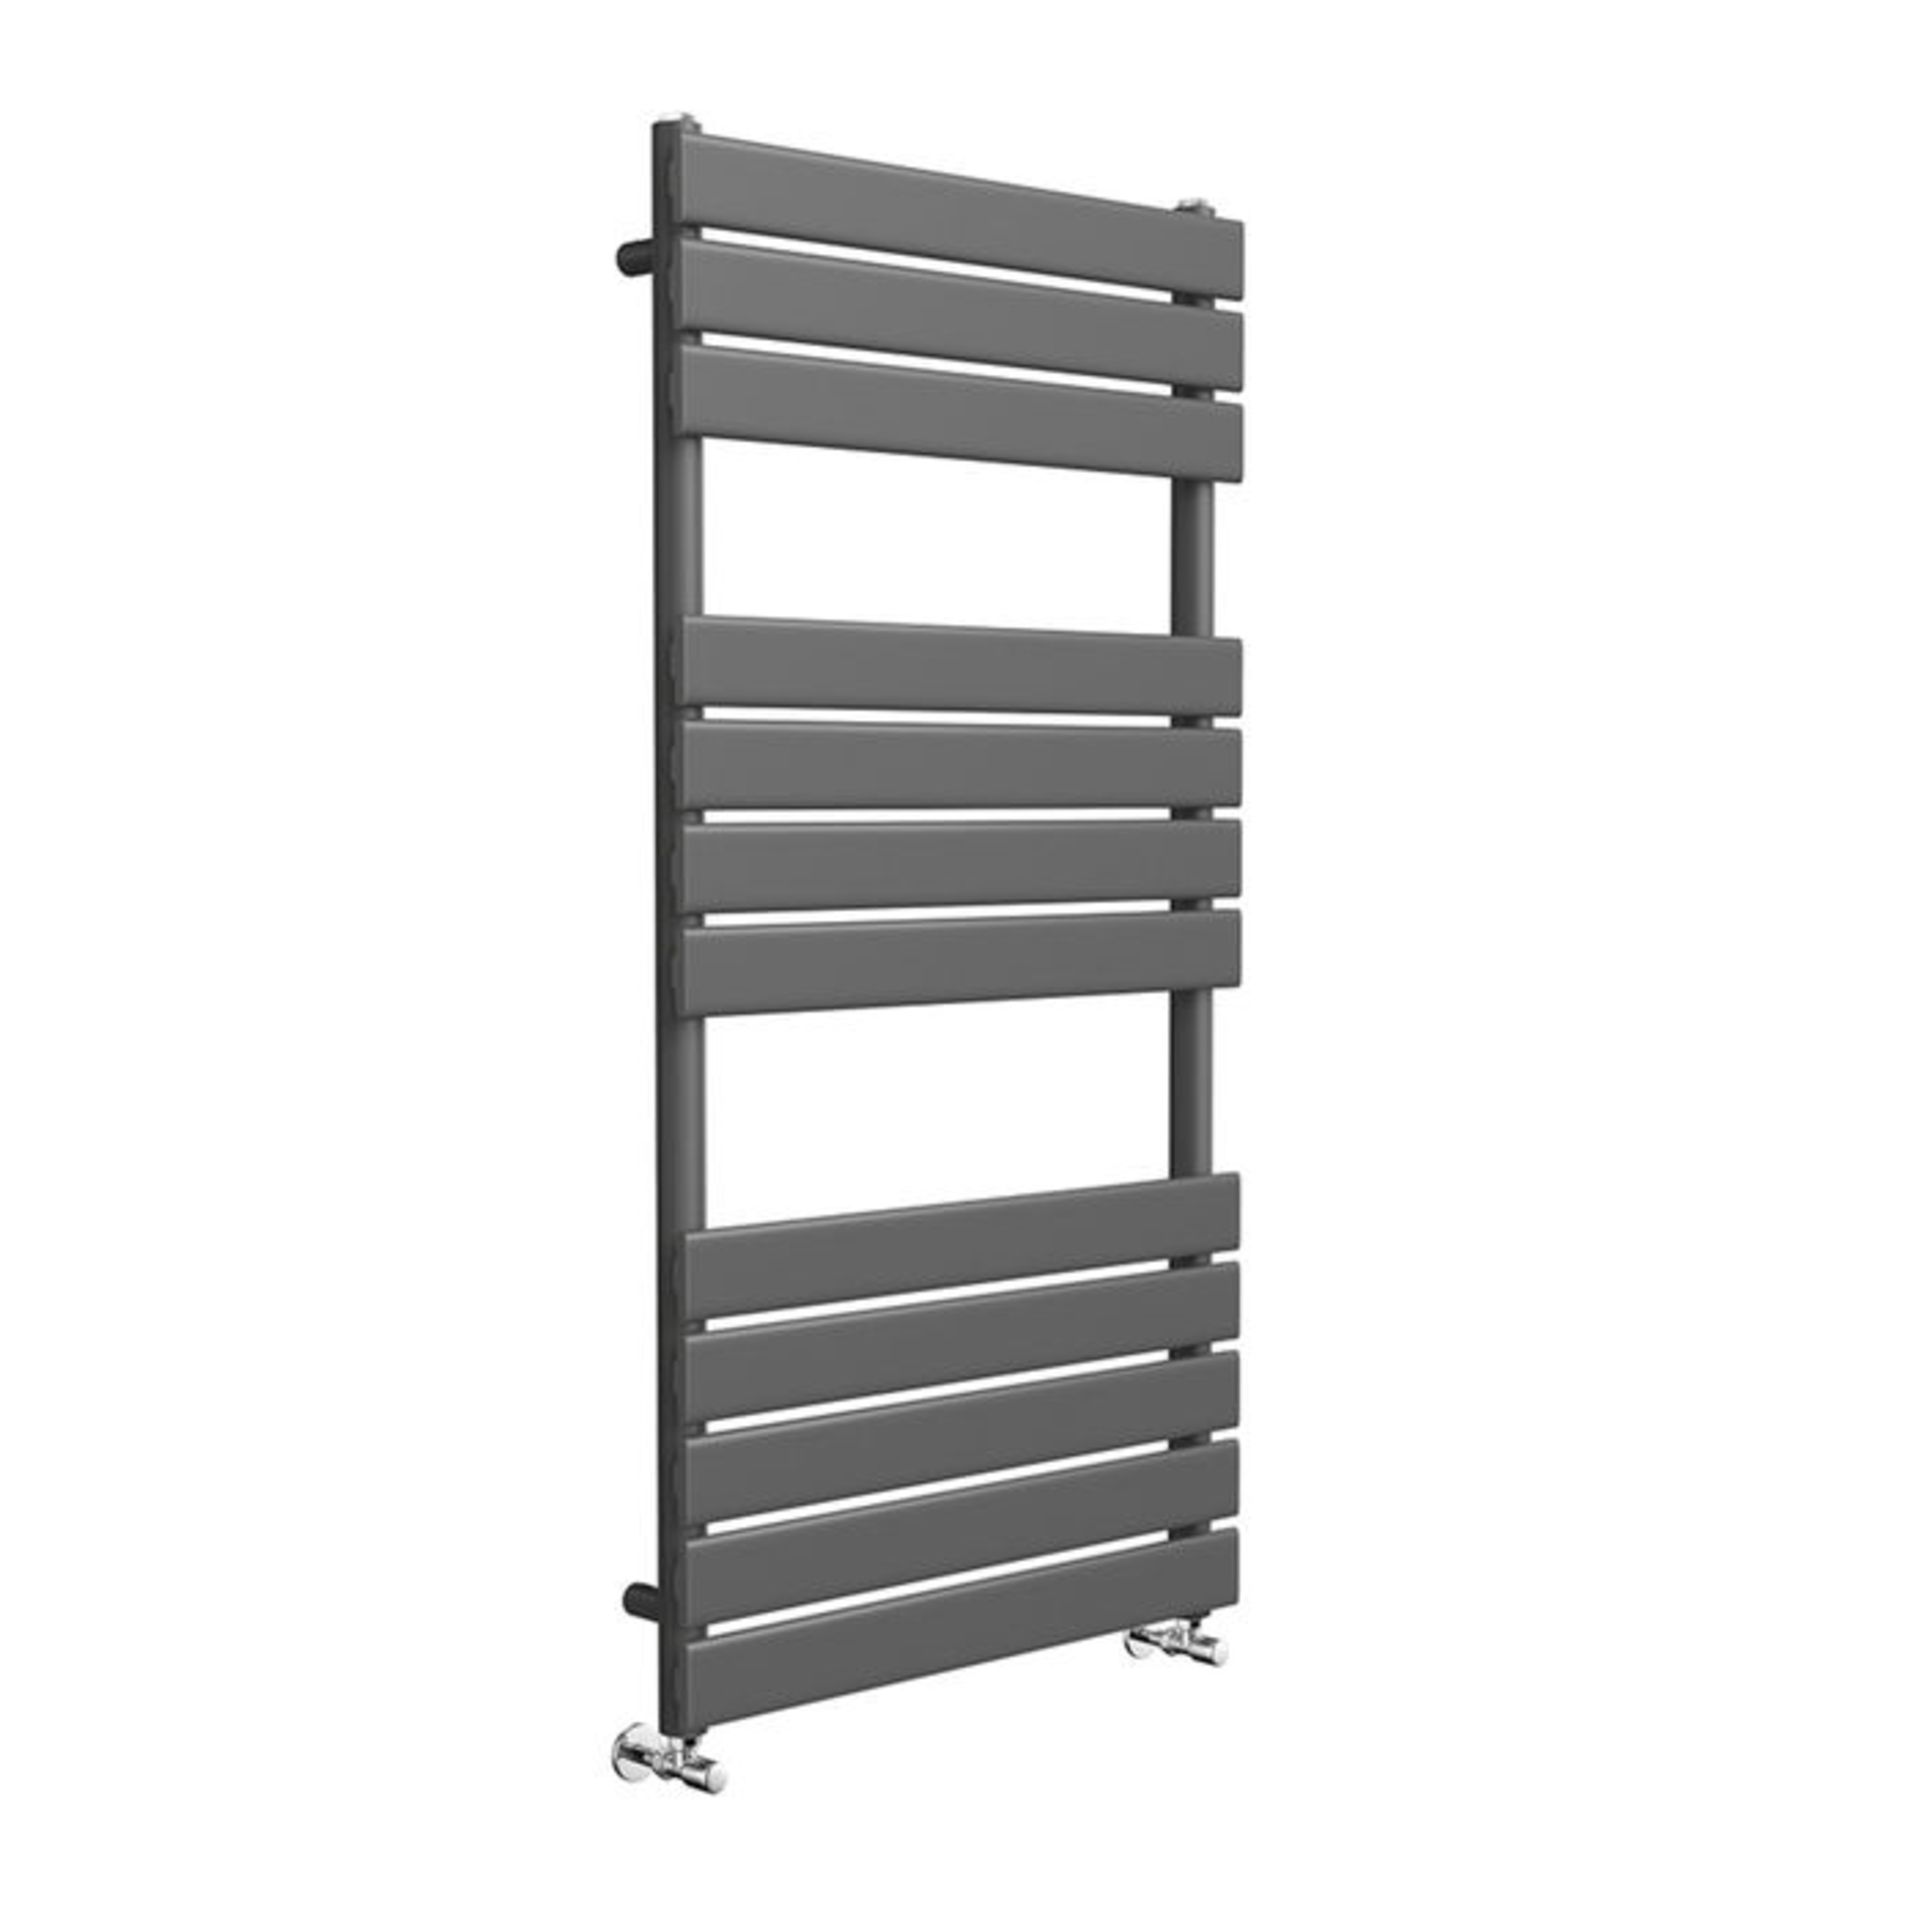 (EY15) 1200x600mm Anthracite Flat Panel Ladder Towel Radiator. . Made with low carbon steel, - Image 3 of 3